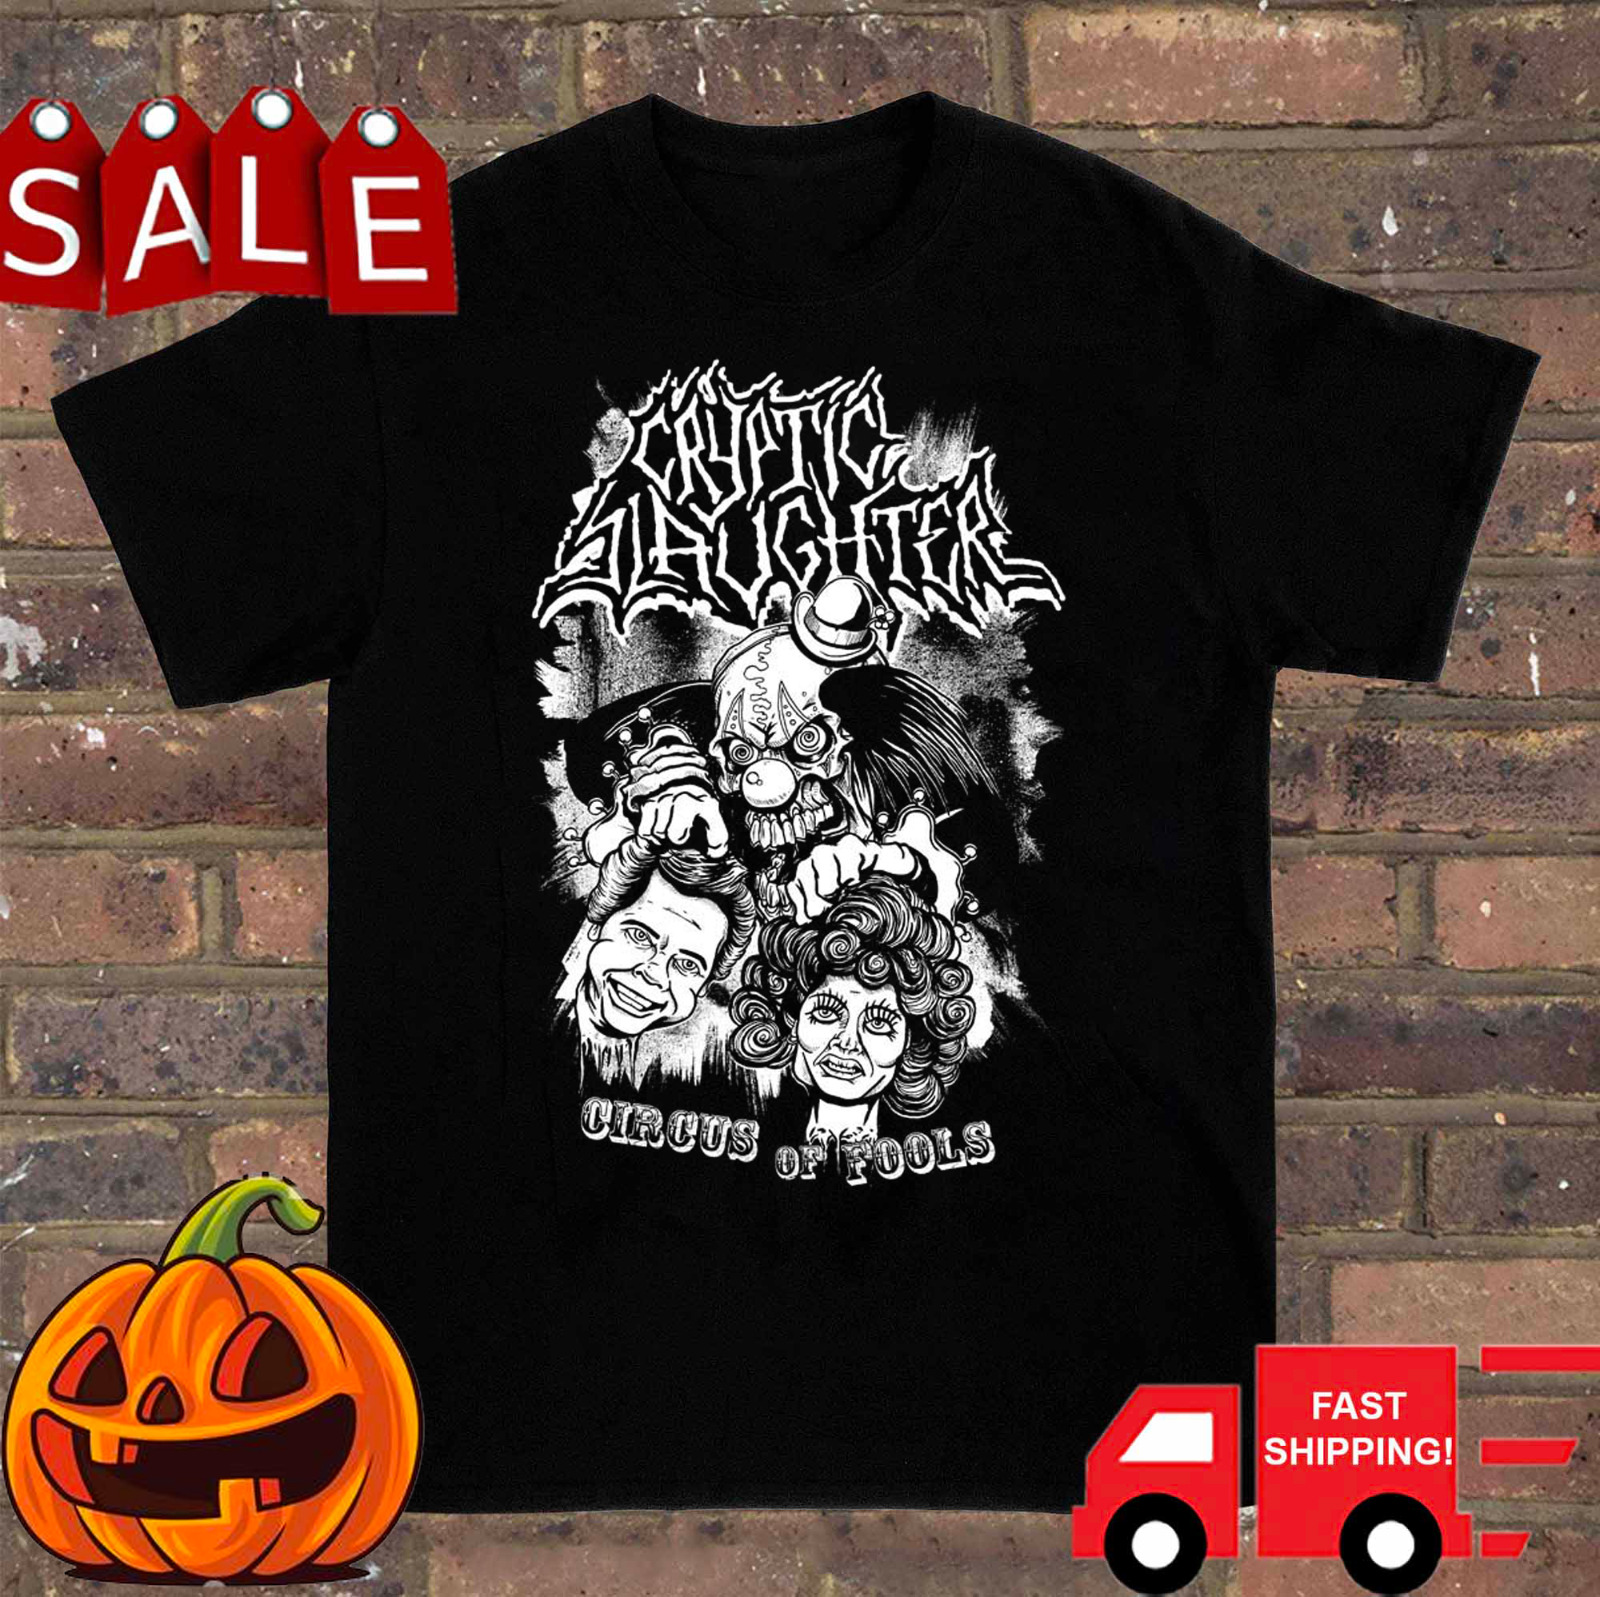 Hello Halloween Cryptic Slaughter Band Shirt Mens Black Unisex S-5XL LE424